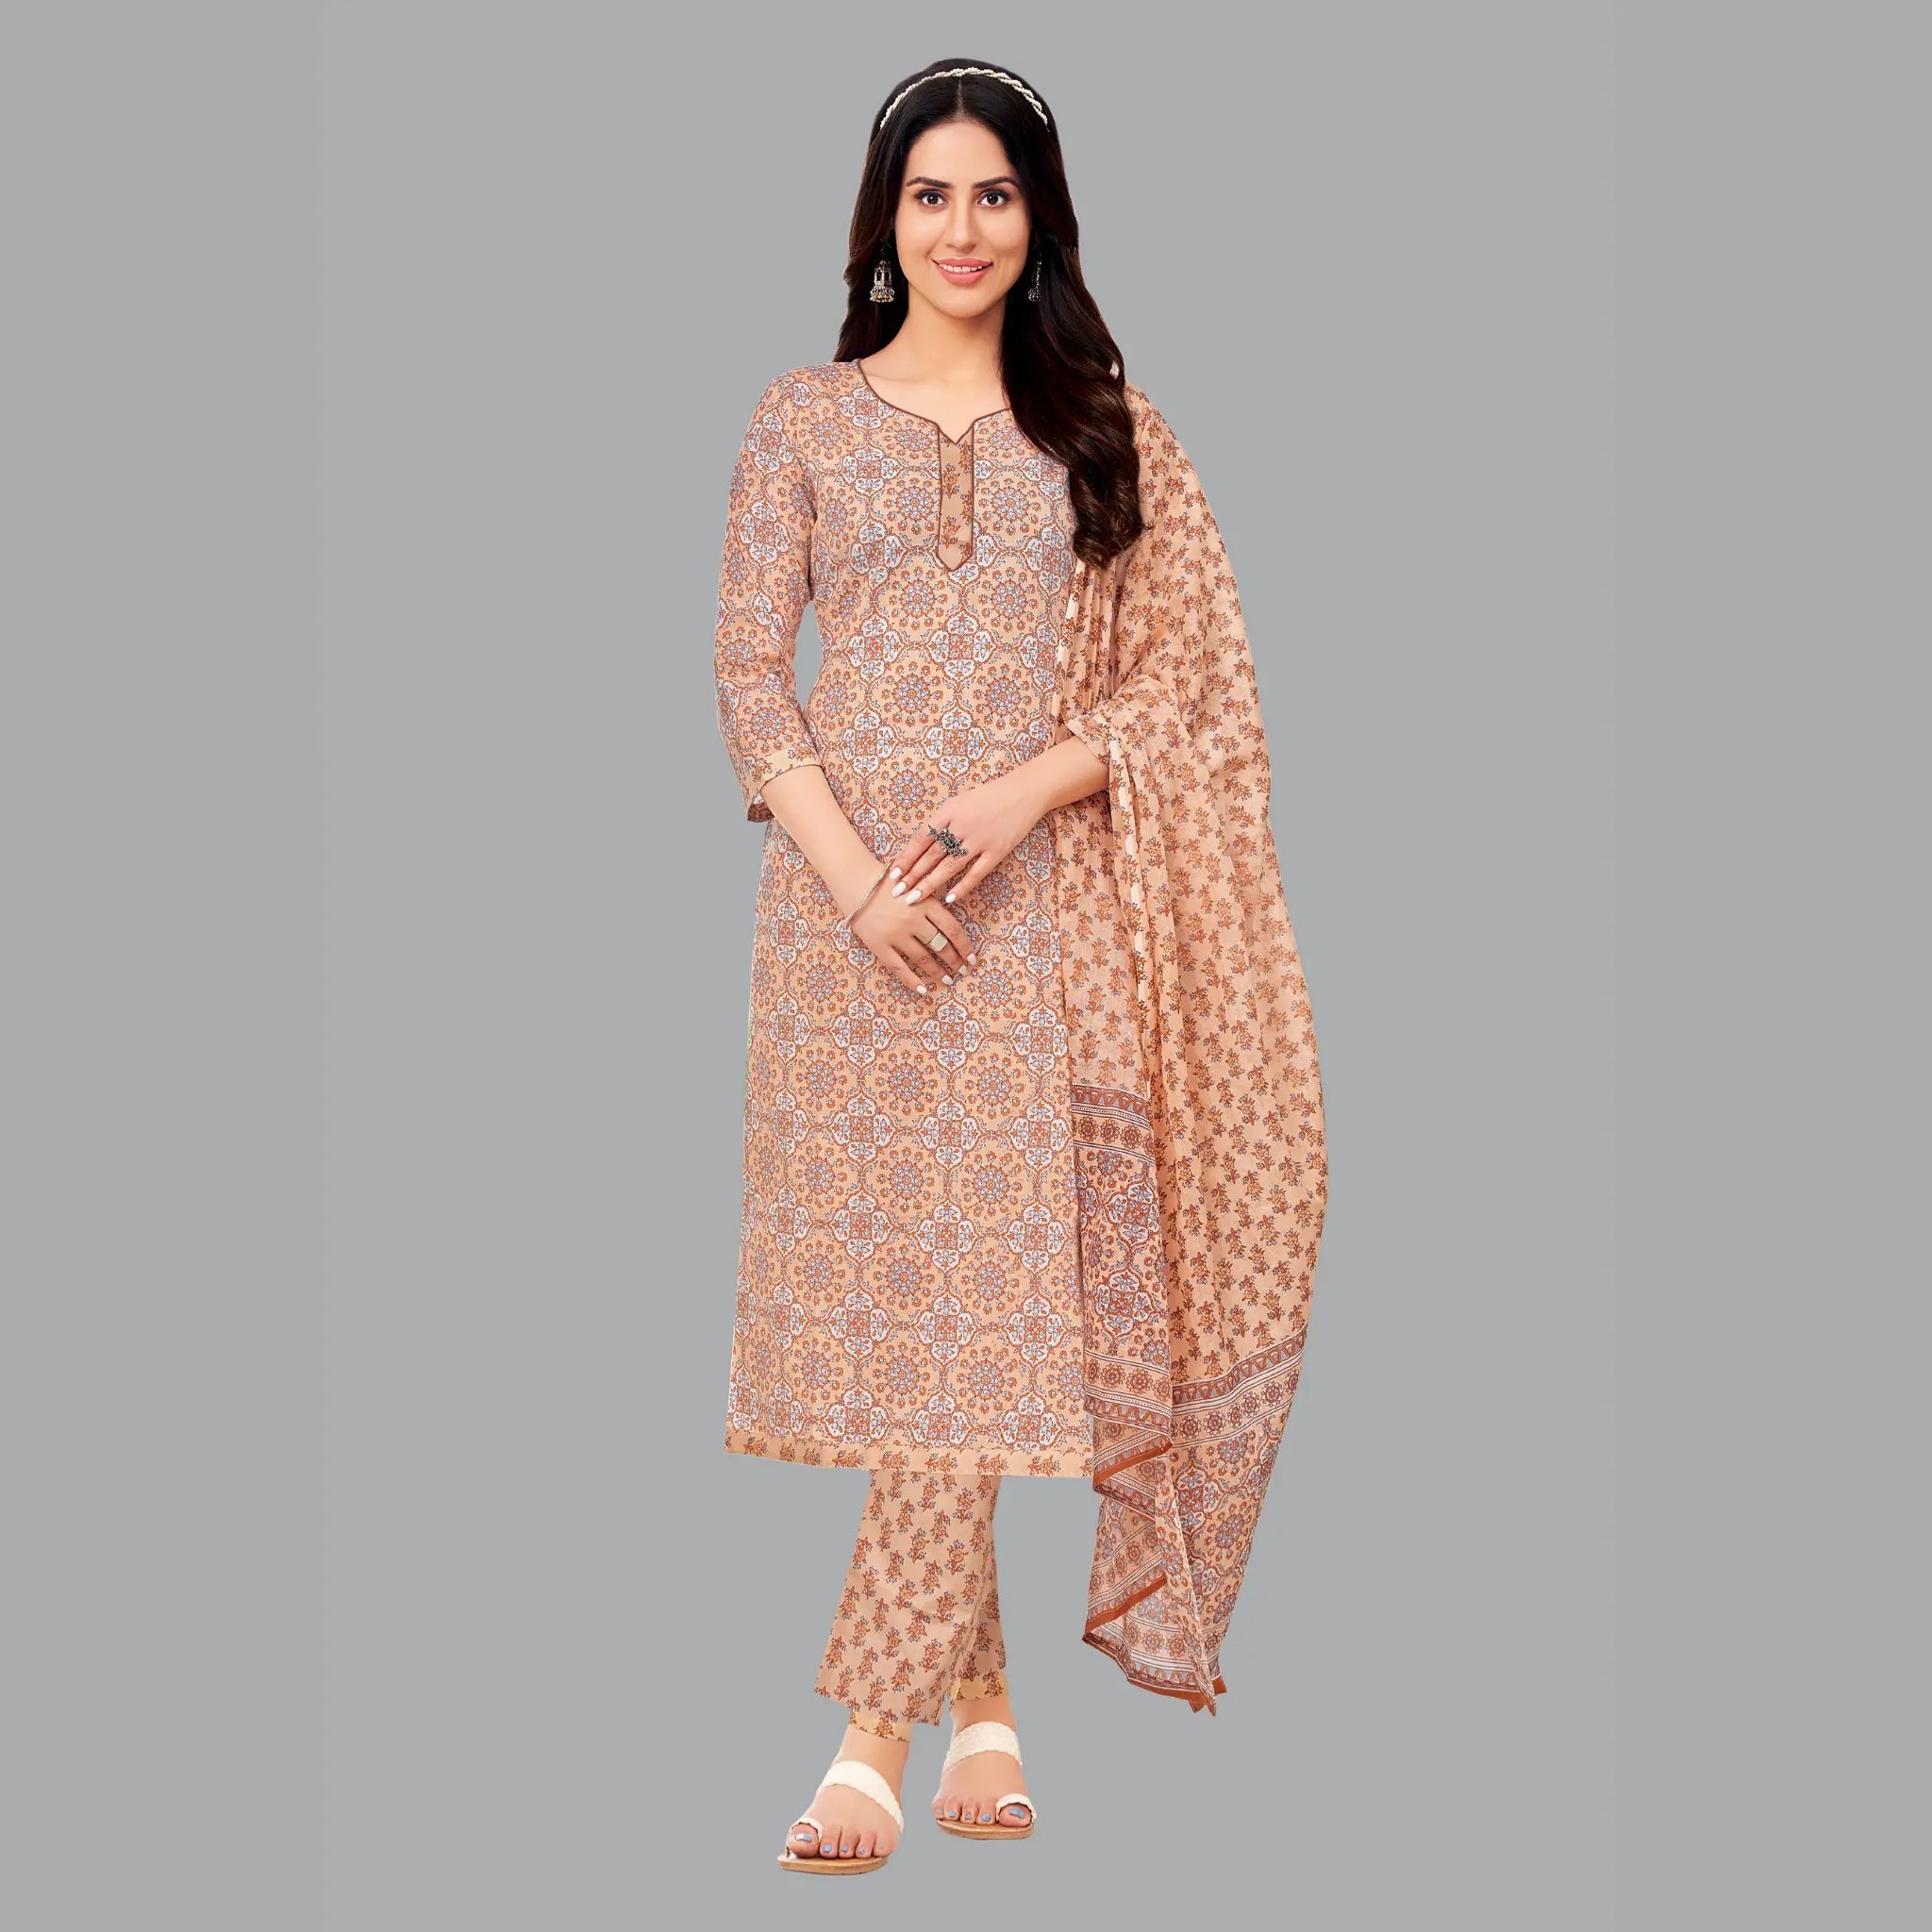 Luxurious Jaipur Cotton Cashmere Kurta with Exquisite Butta Print Pant and Dupatta - Women's Outfit 199